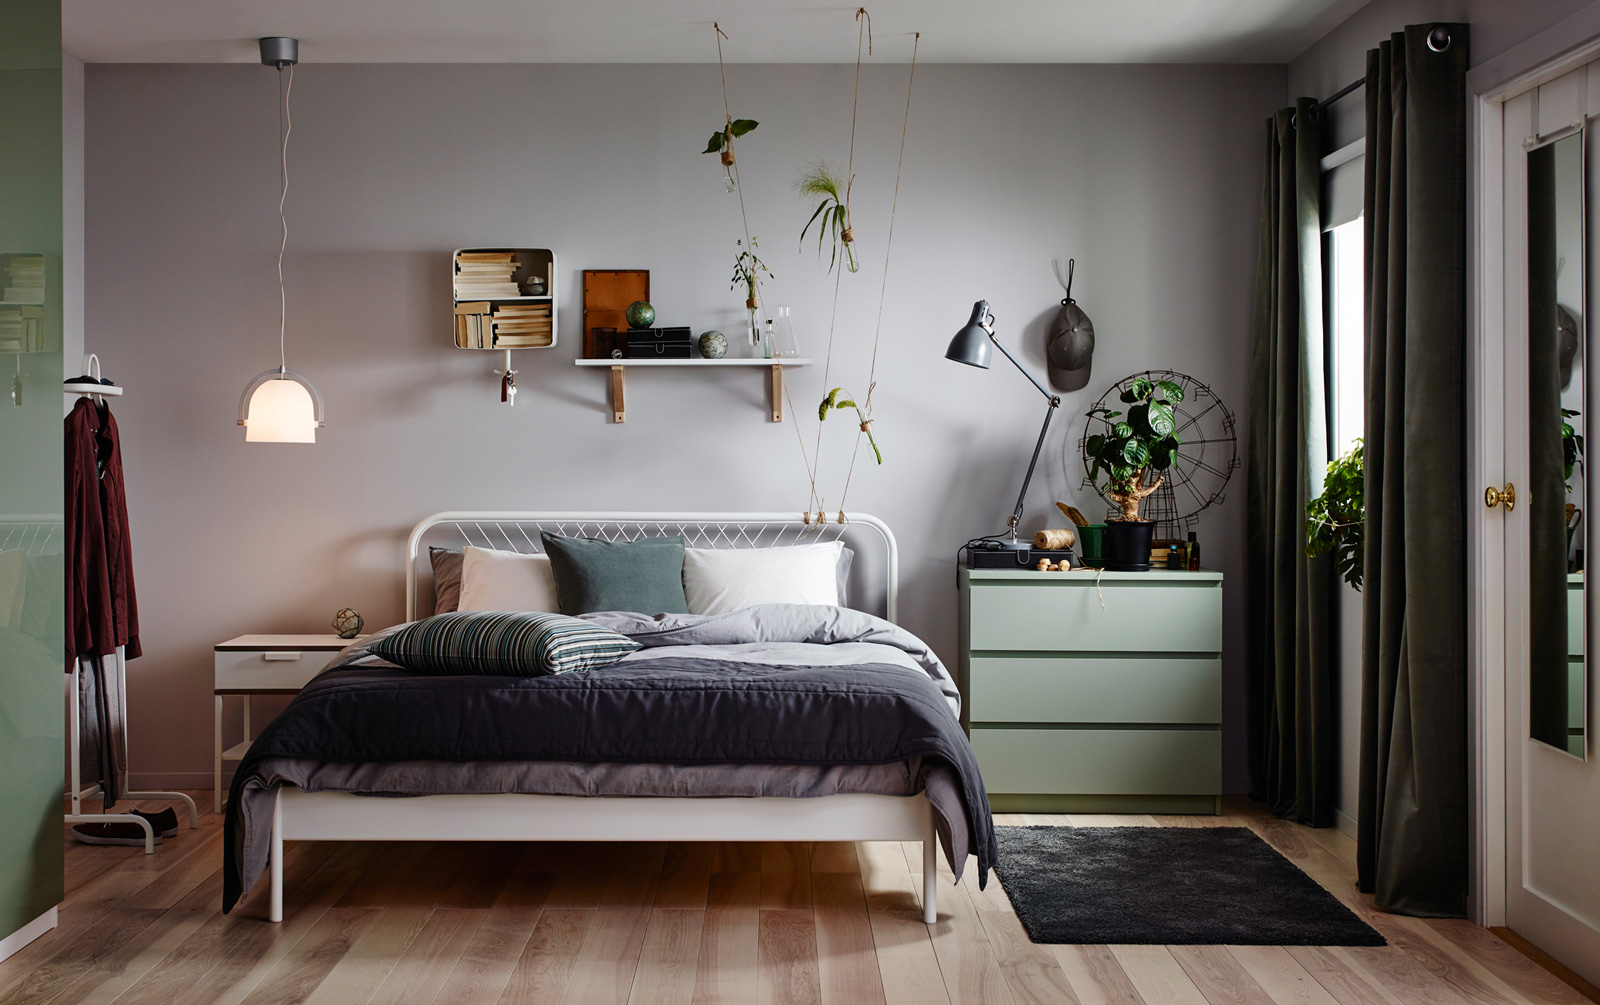 Make sure bedroom essentials are in one place while decorating bedroom - Beautiful Homes